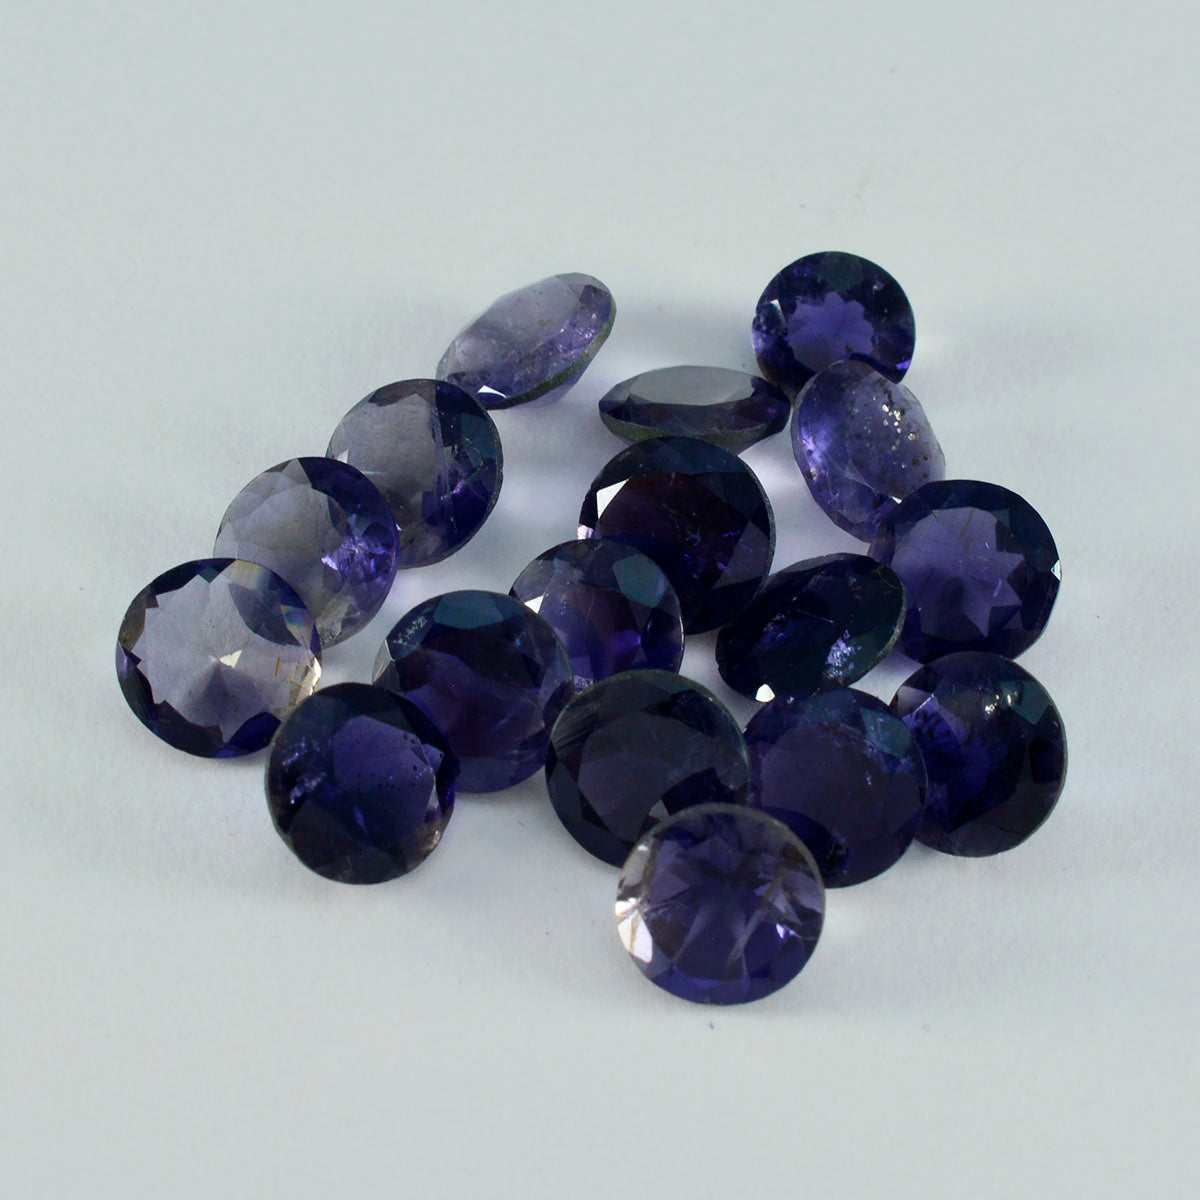 Riyogems 1PC Blue Iolite Faceted 7x7 mm Round Shape great Quality Loose Stone